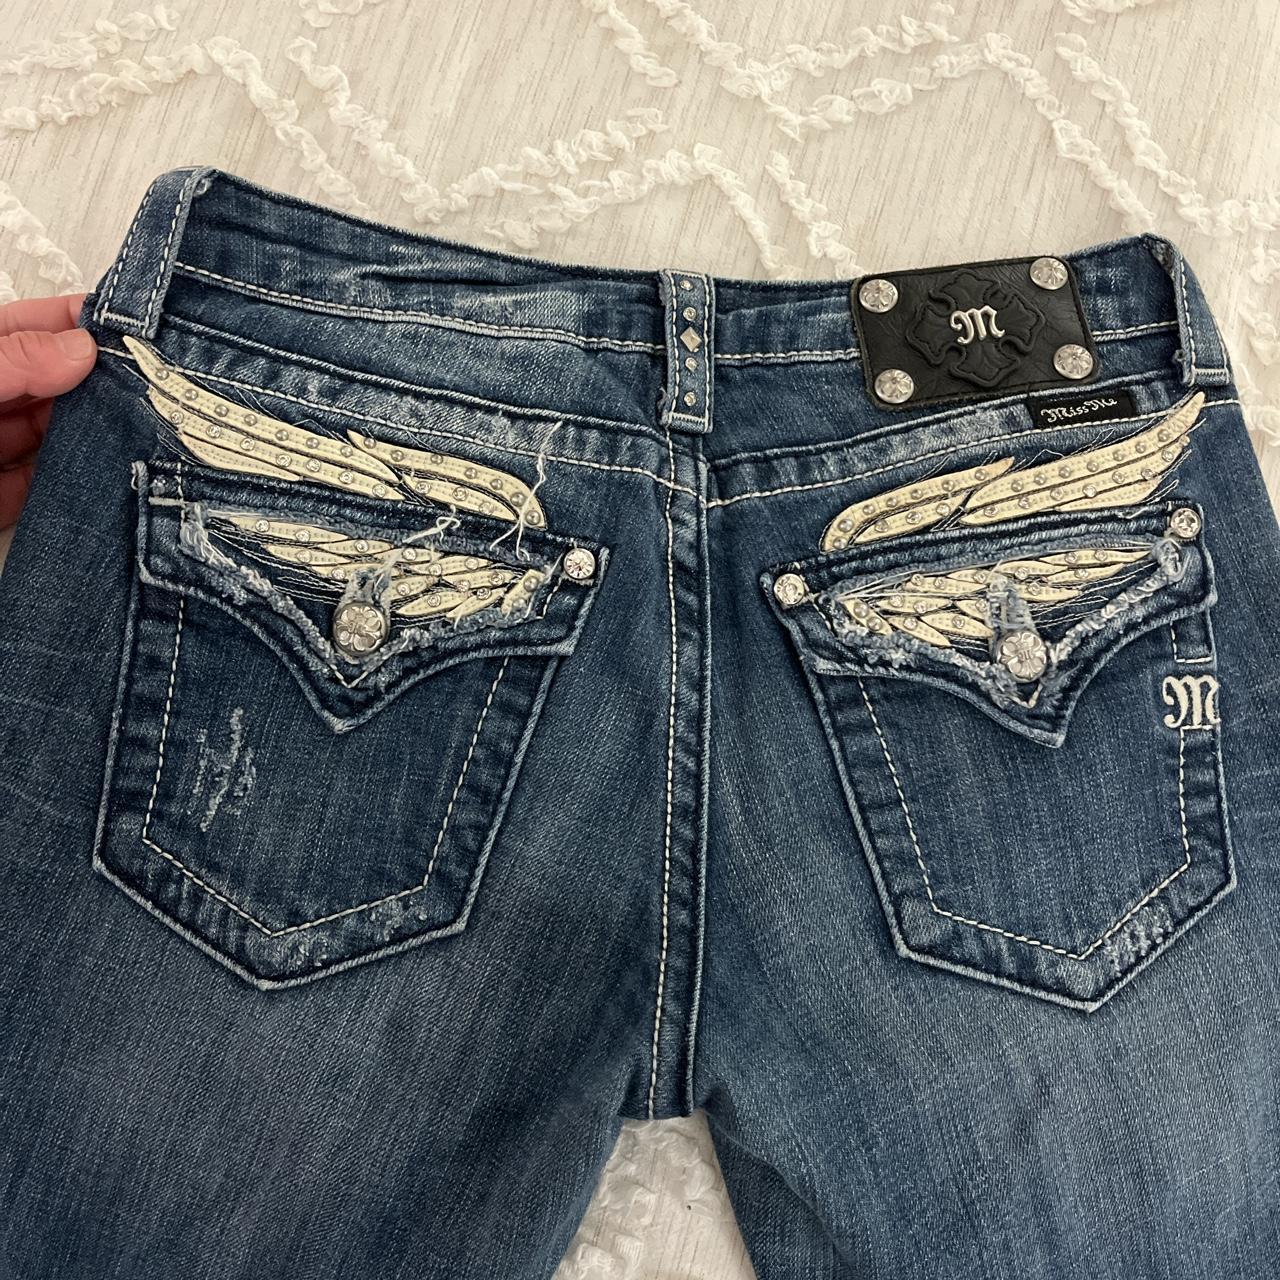 Rare discontinued Miss me jeans boot cut style with... - Depop